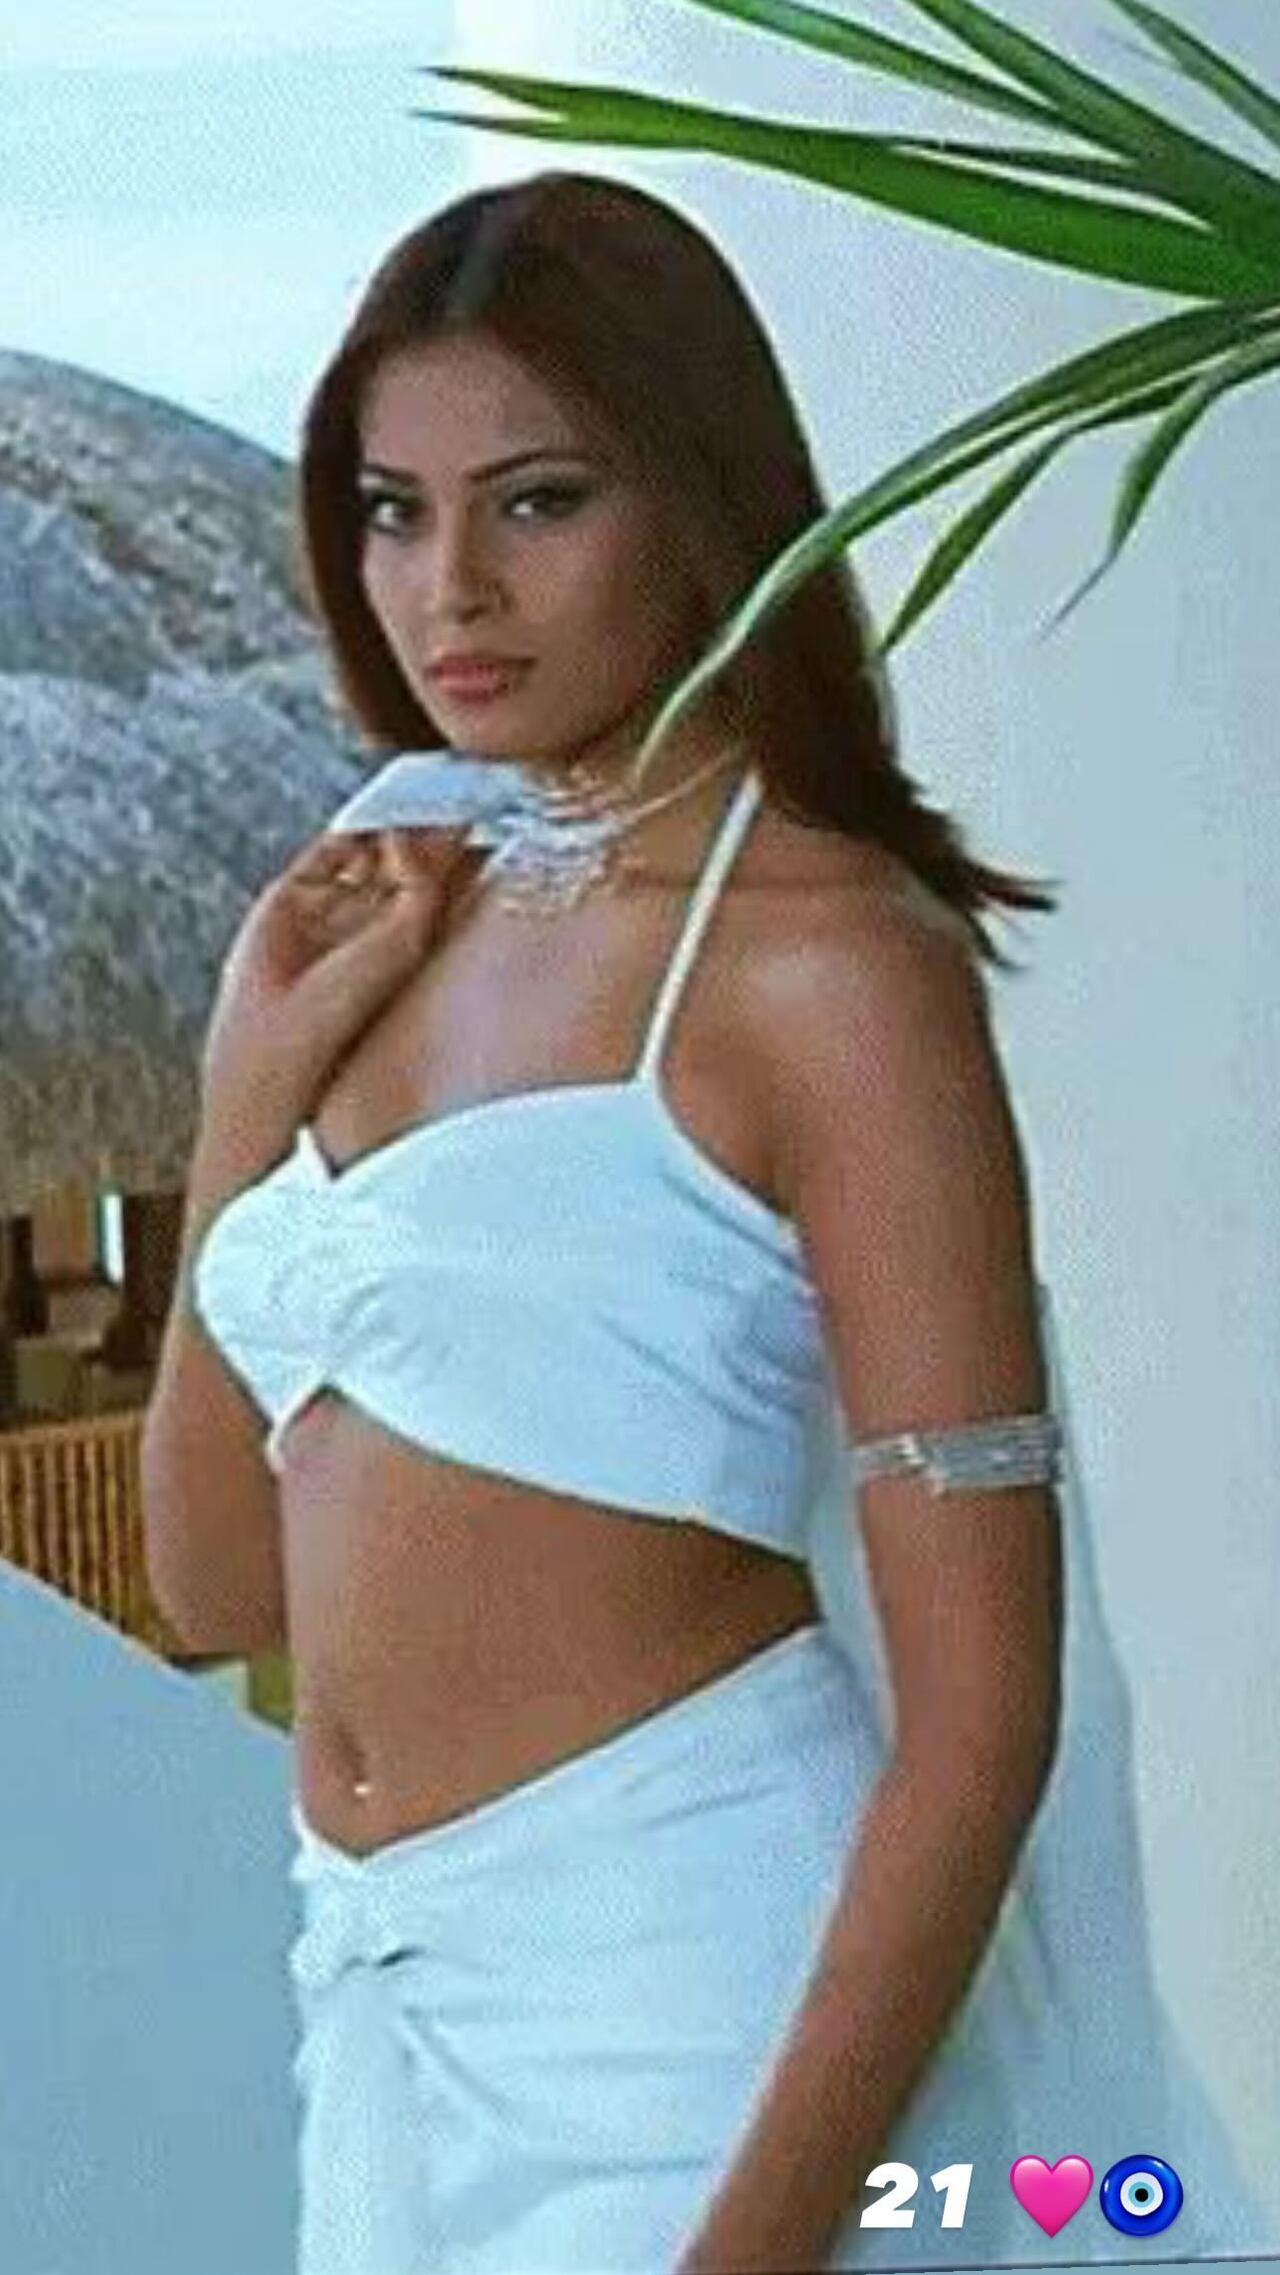 Bipasha Basu also shared a still from one of her films that she featured in at the age of 21